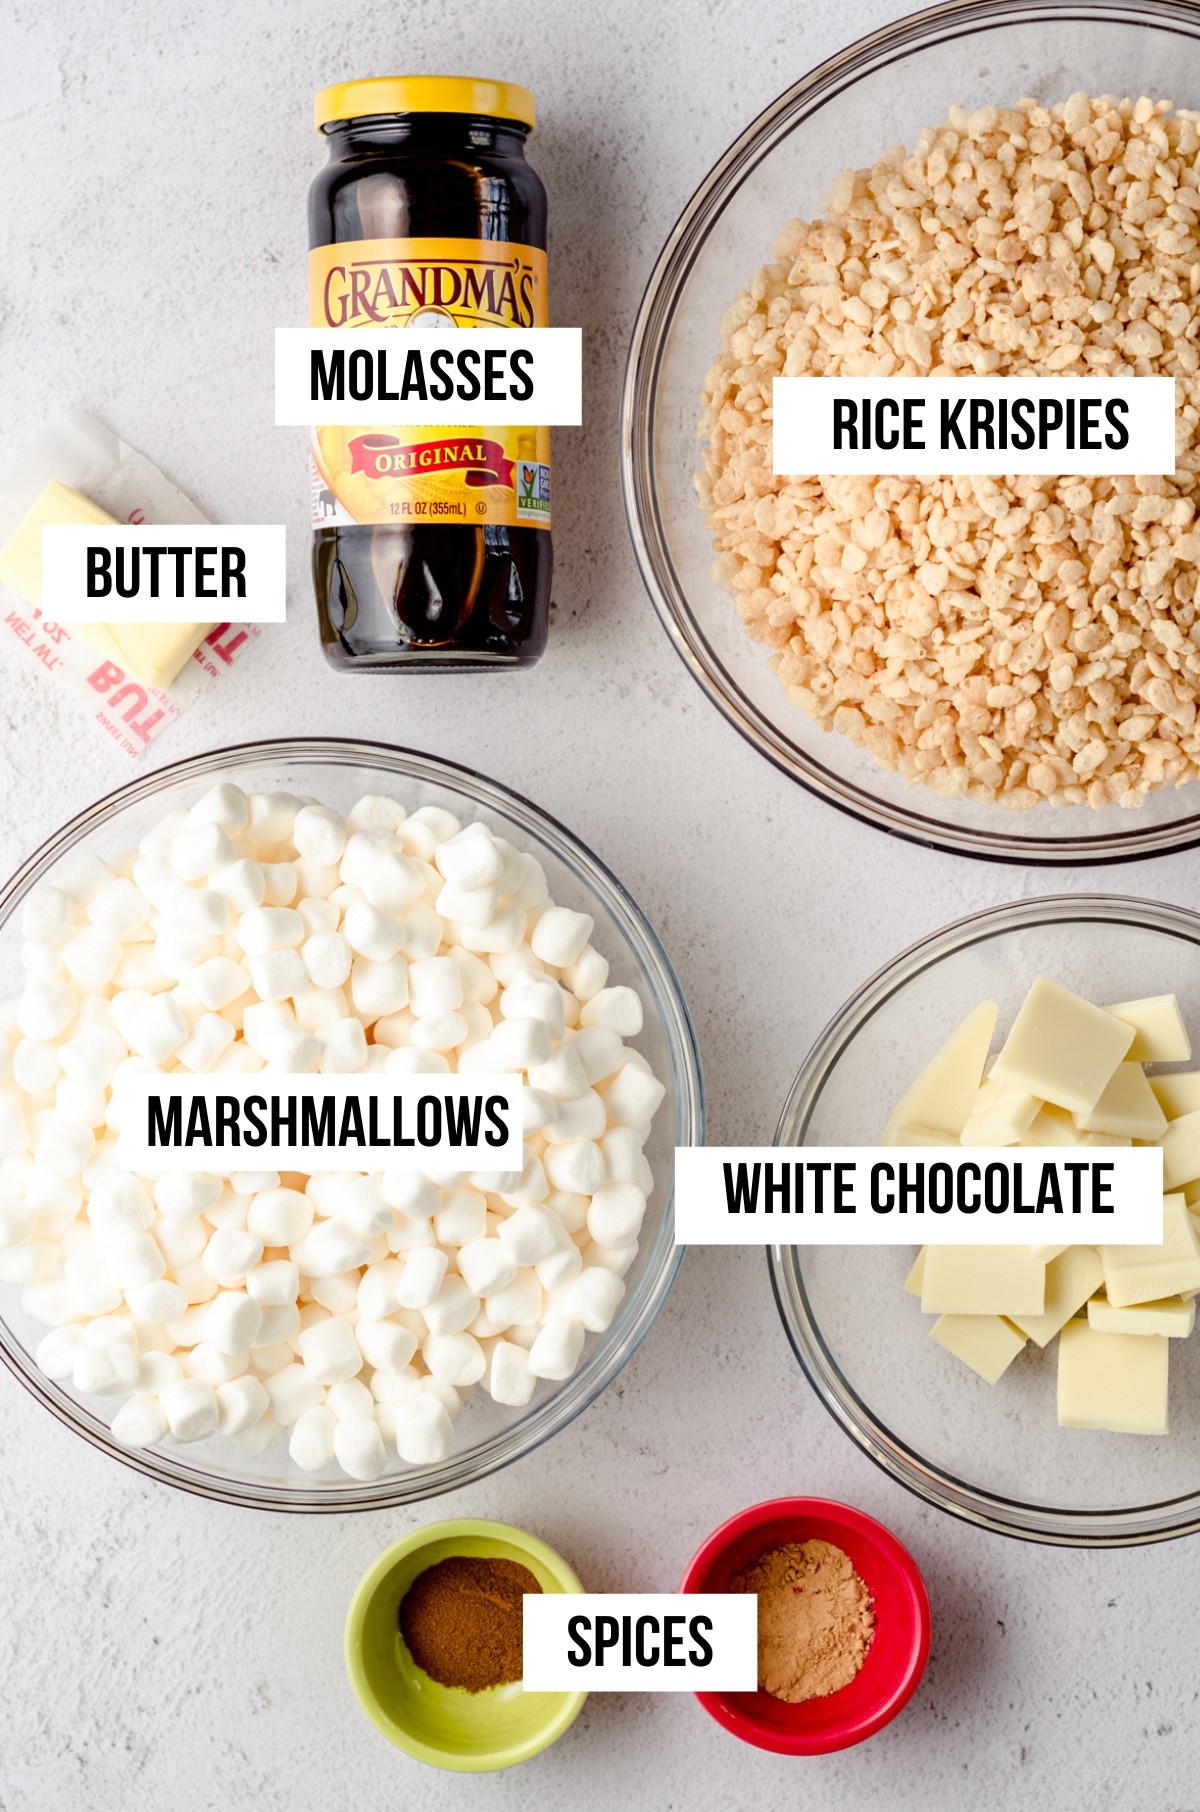 Aerial photo of ingredients for gingerbread Rice Krispies treats with text overlay.